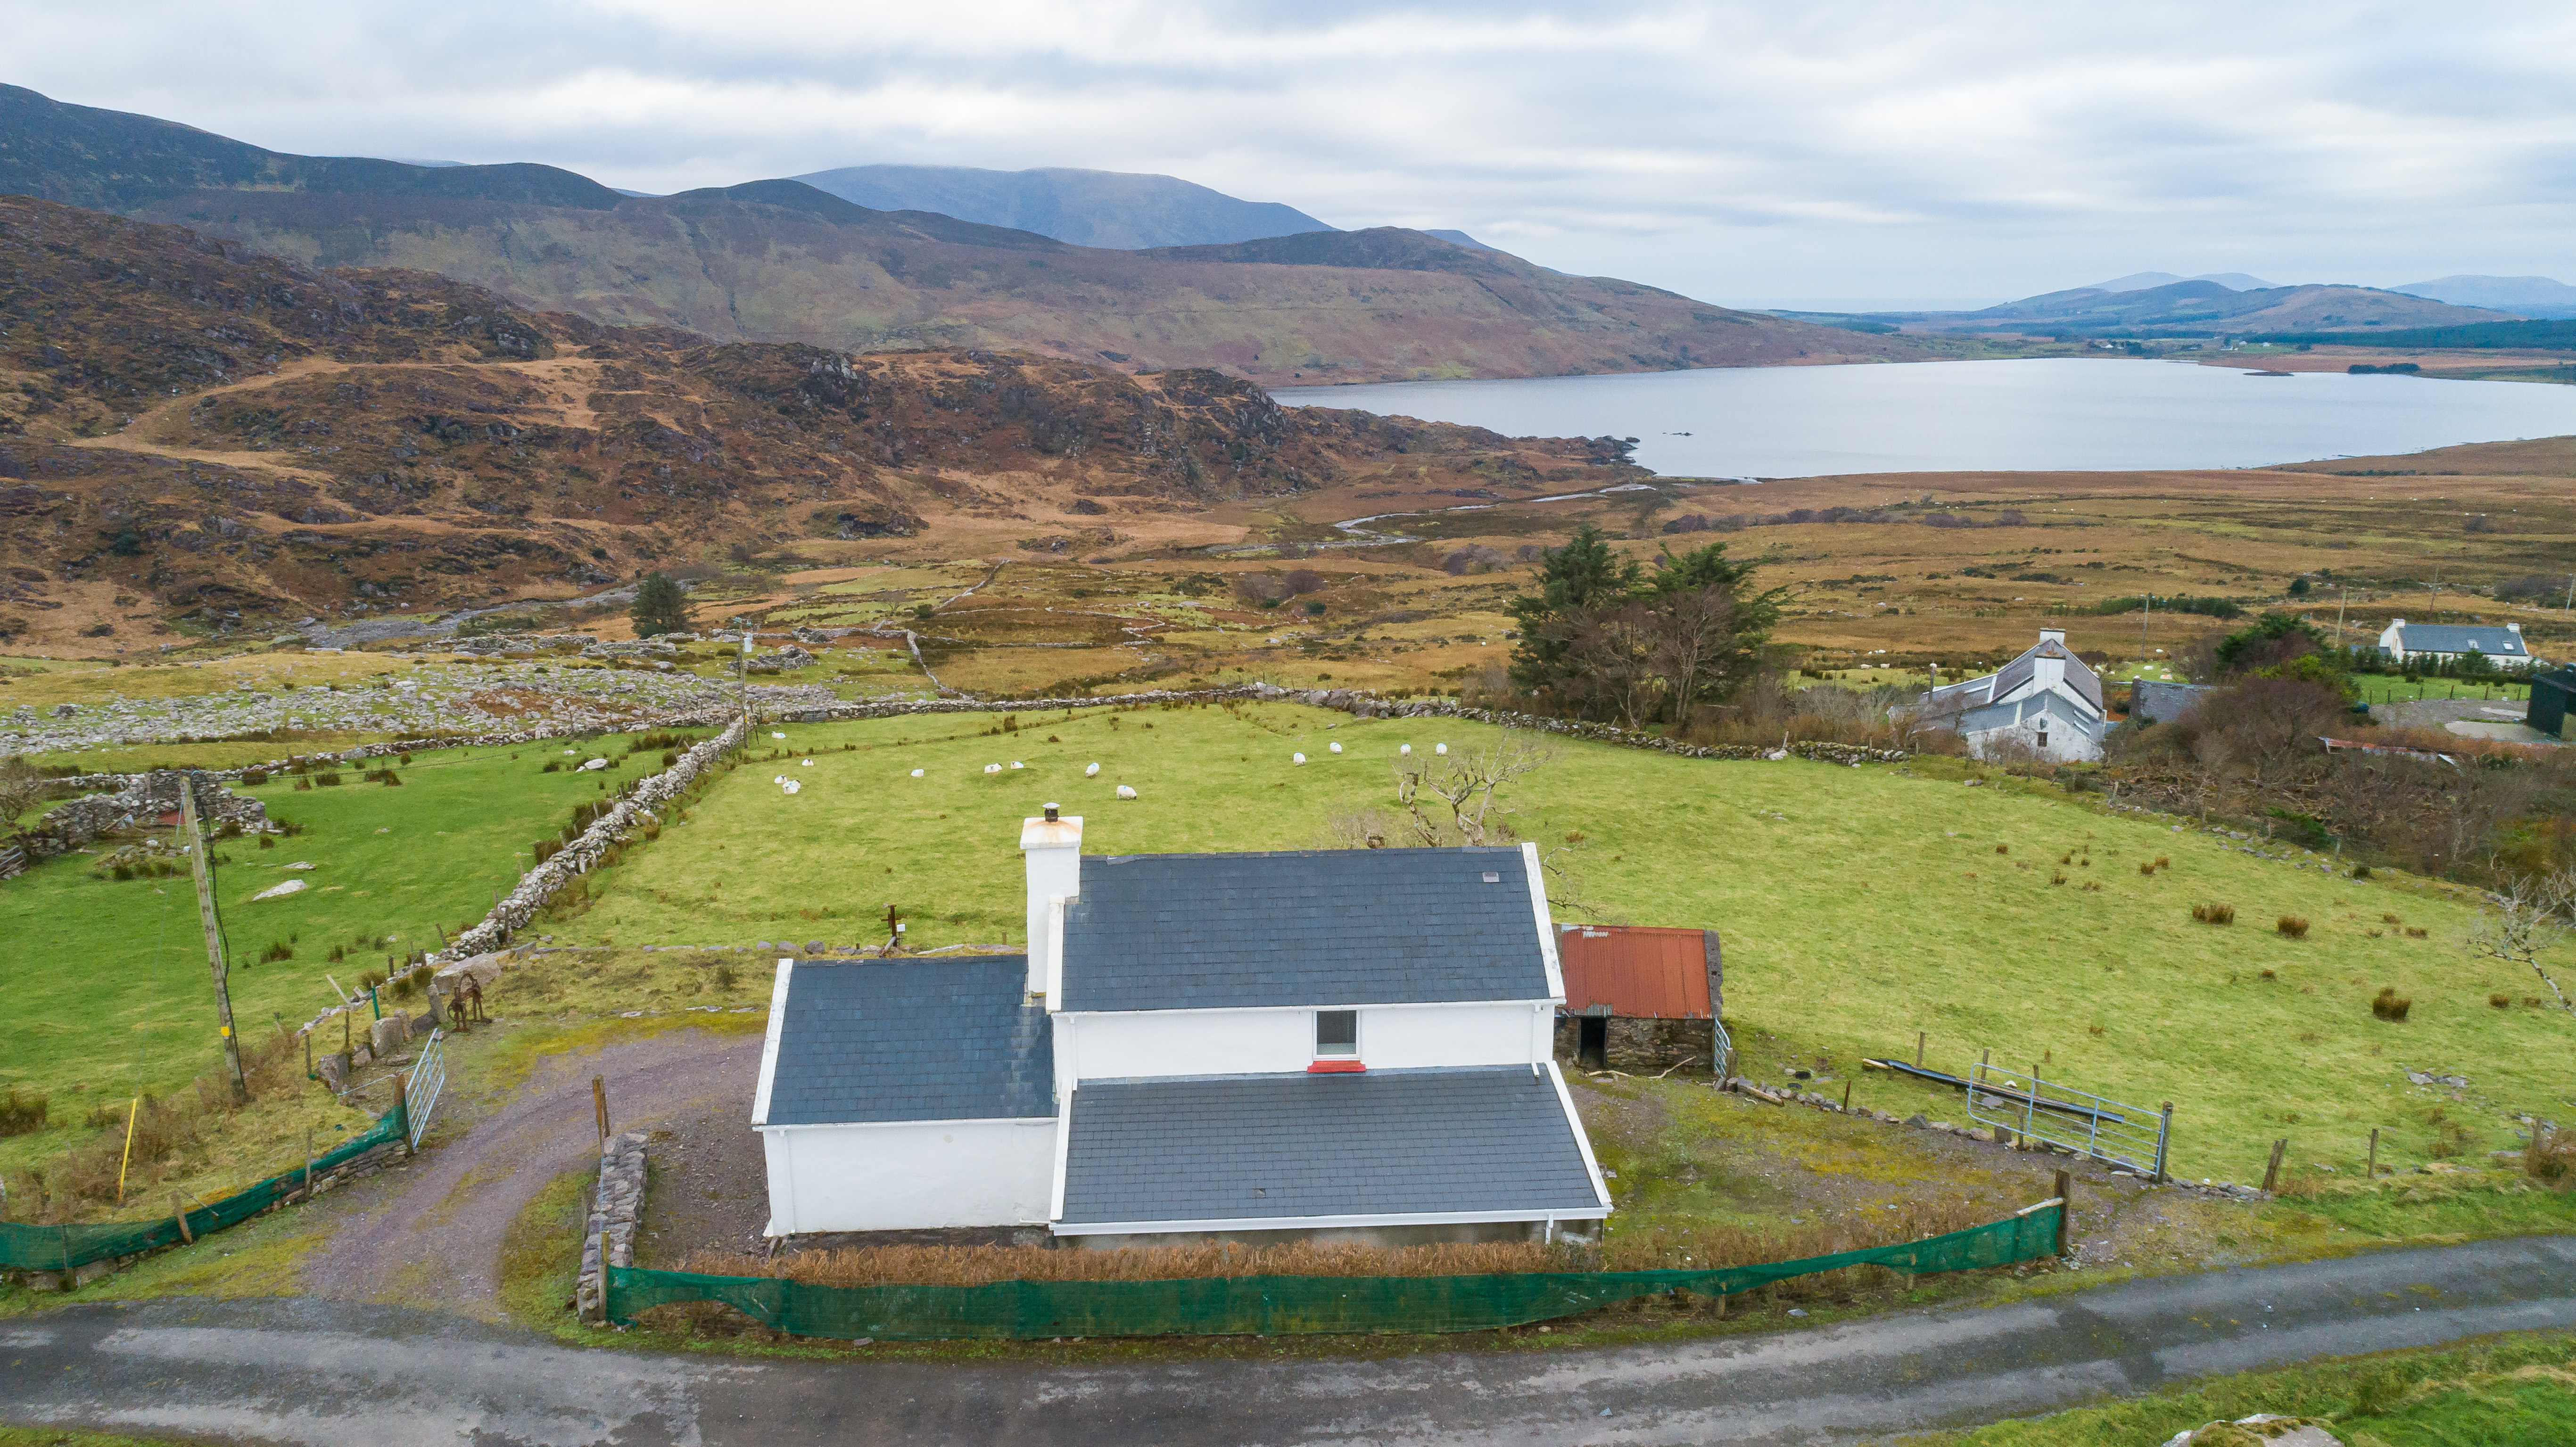 Traditional style house and land- Coomavohir, Waterville V23 W42, Plus 232.82 acre Residential Holding (87.82acres freehold & 145 acres commonage)